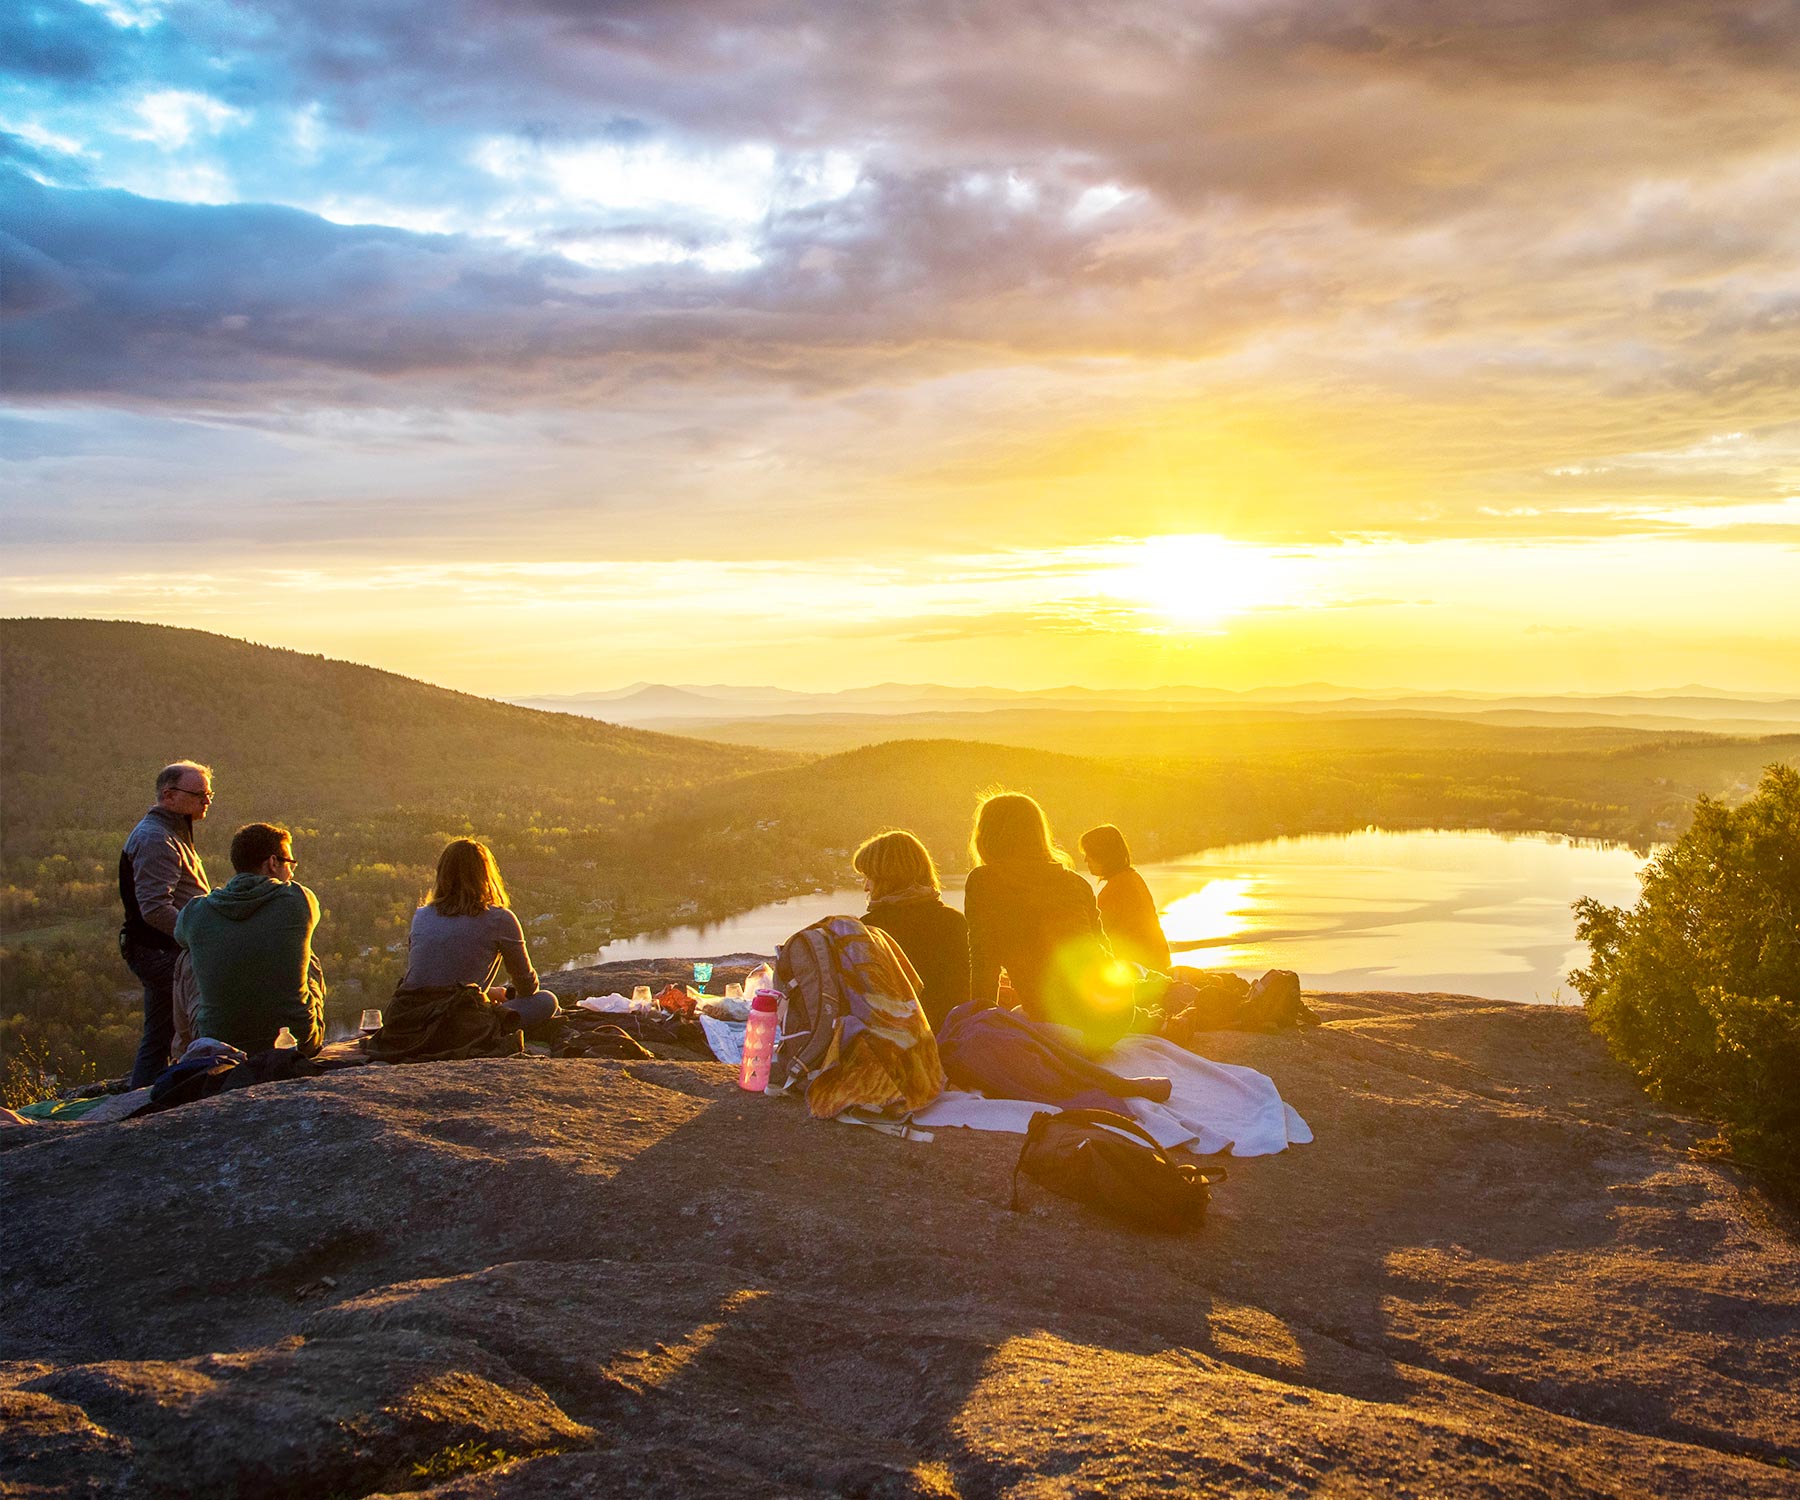 A family is enjoying the Sunrise or sunset at the top of the mountain